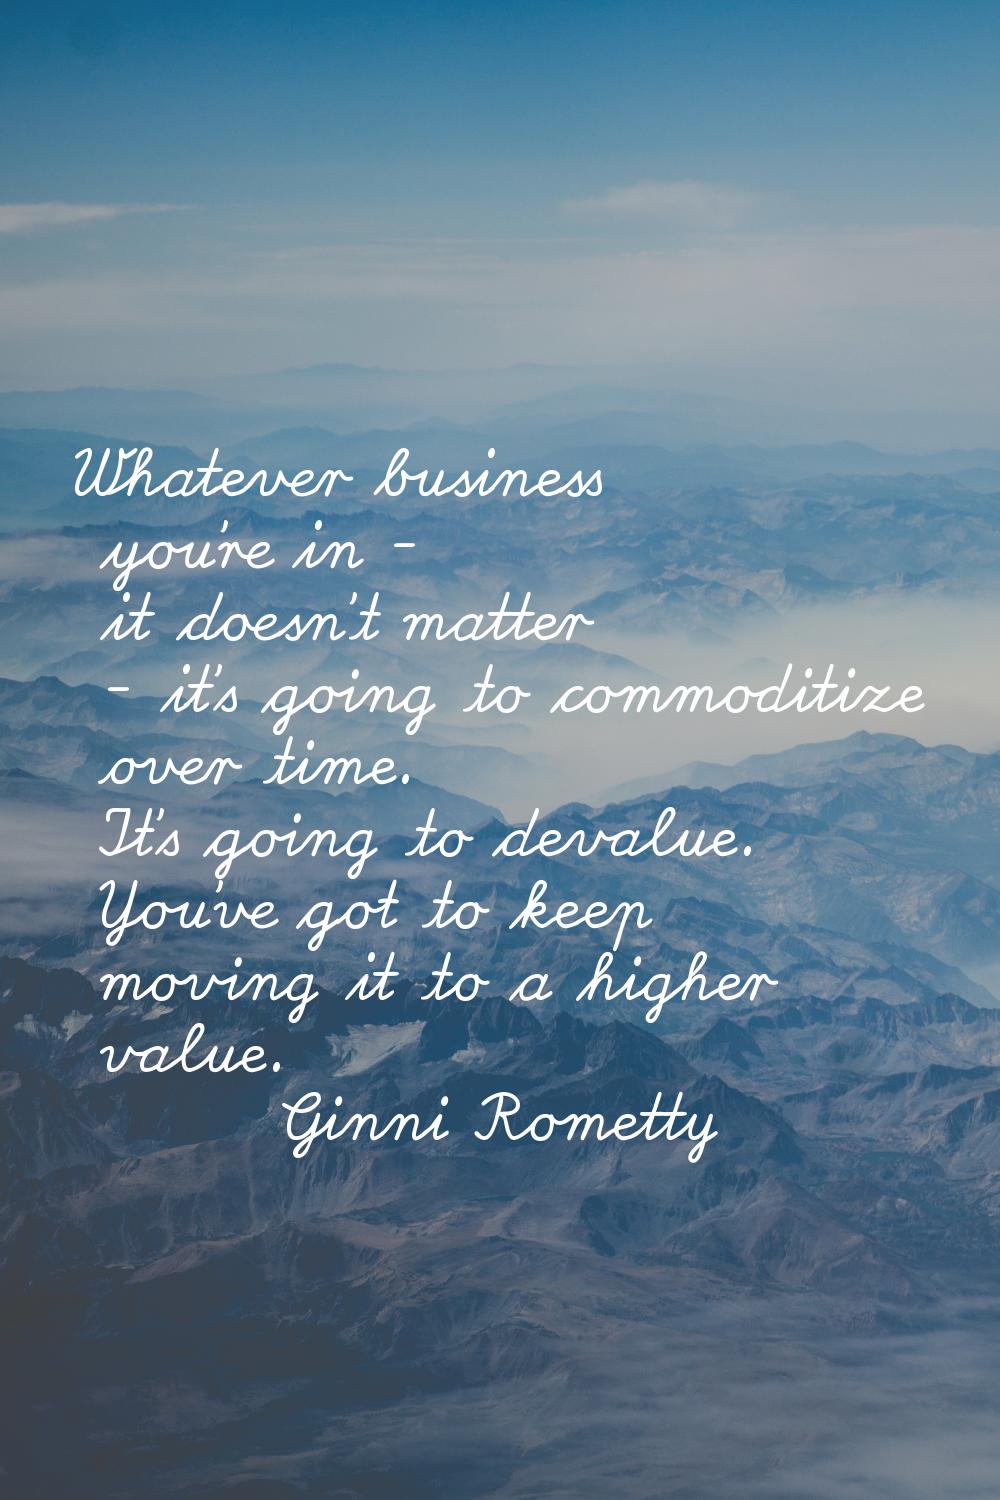 Whatever business you're in - it doesn't matter - it's going to commoditize over time. It's going t